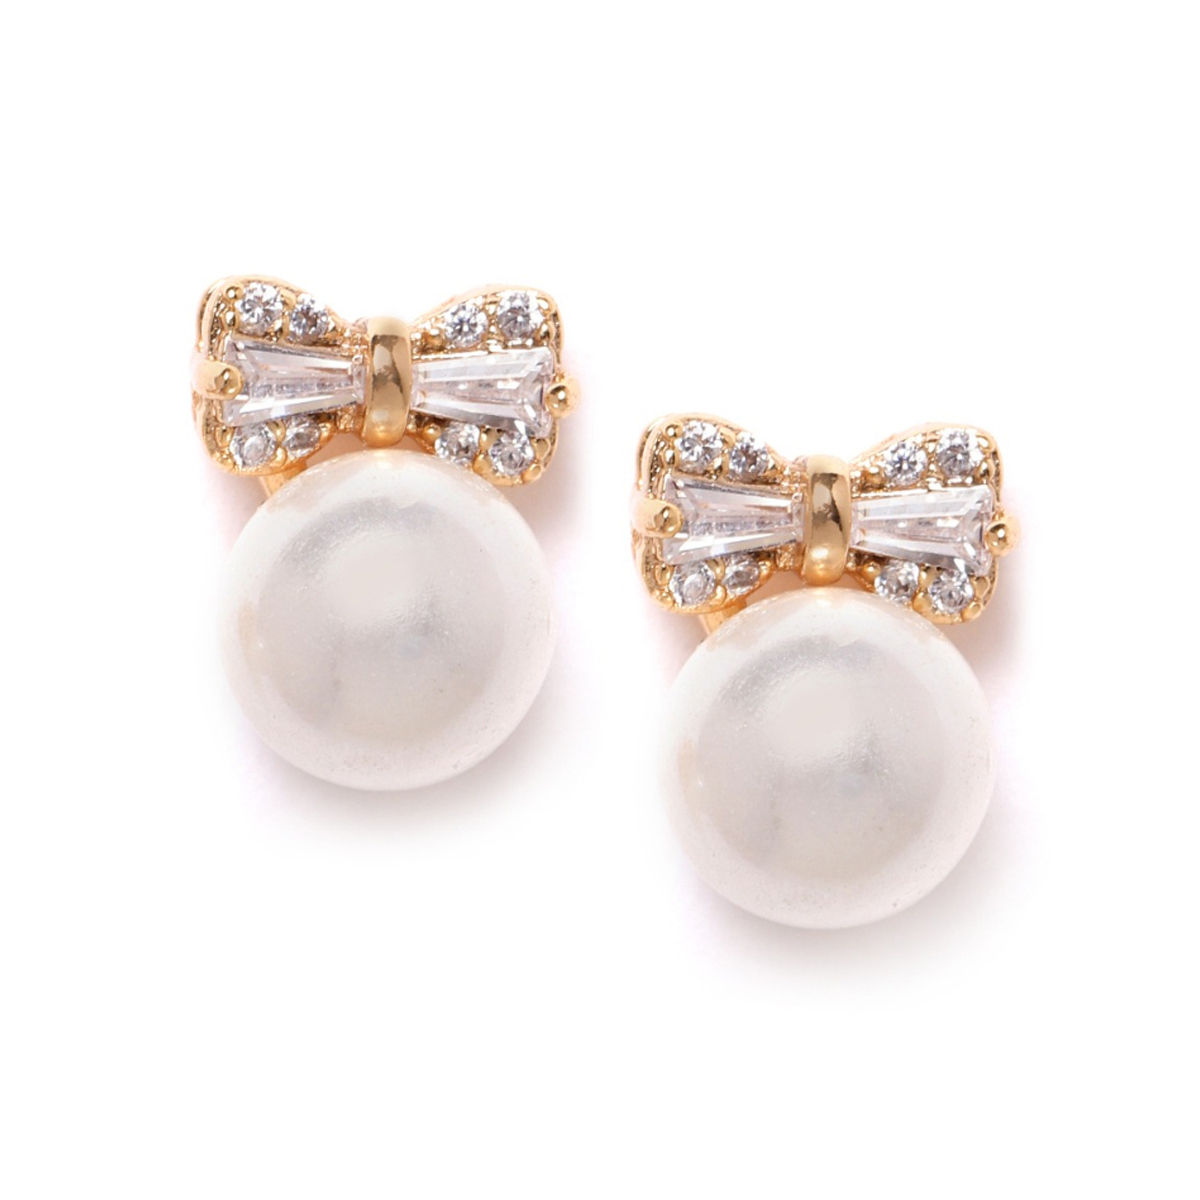 Flipkartcom  Buy Wumania Love Bow Pearl Stud Earrings For Women  Girls  GoldPlated Pearl Stud Alloy Stud Earring Online at Best Prices in India